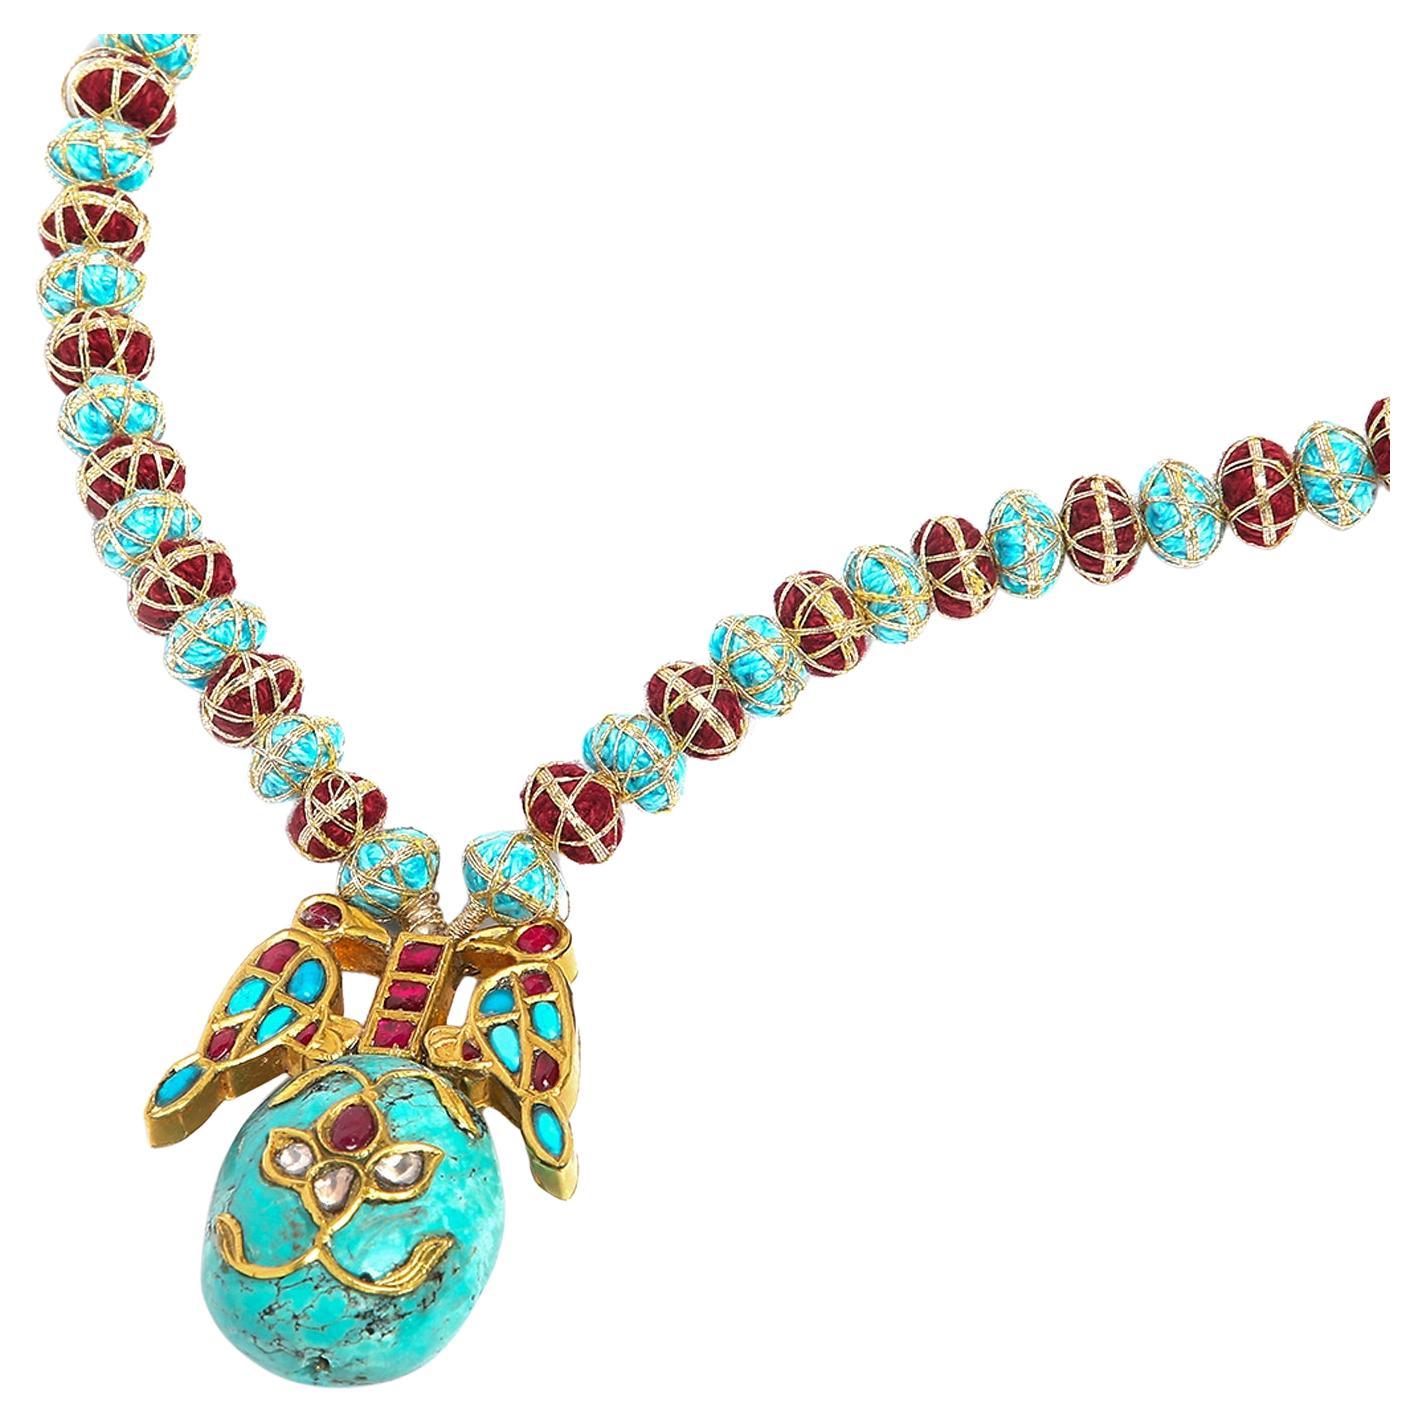 Gold Polki Necklace With Turquoise And Ruby - Vintage Intention For Sale